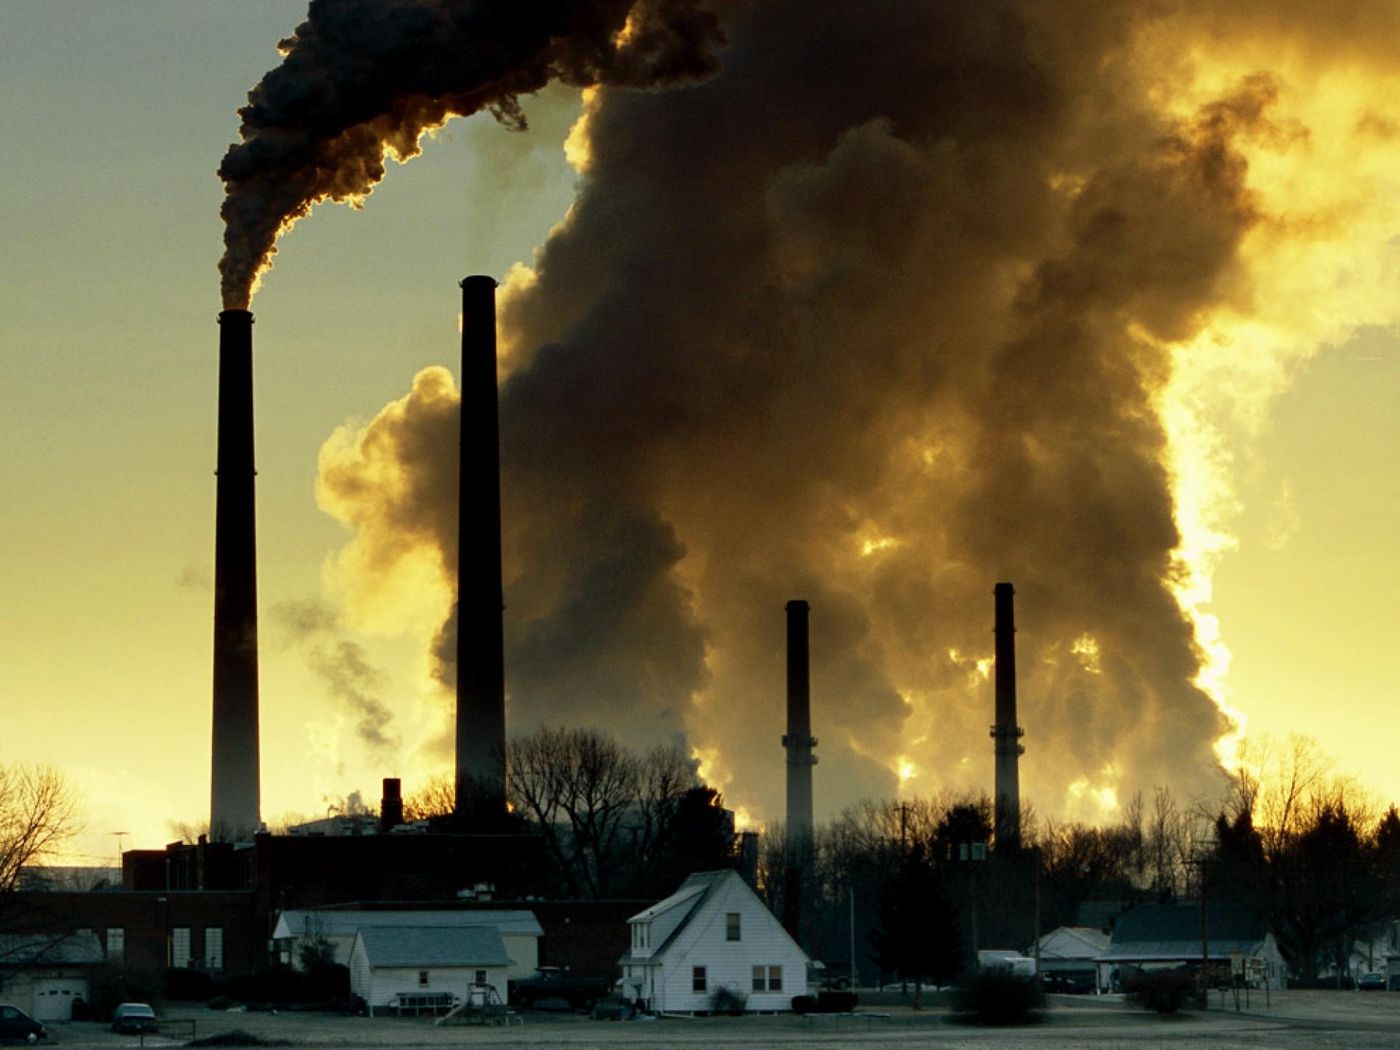 Air pollution causes diseases that lead to premature deaths around the world. Photo: National Geographic